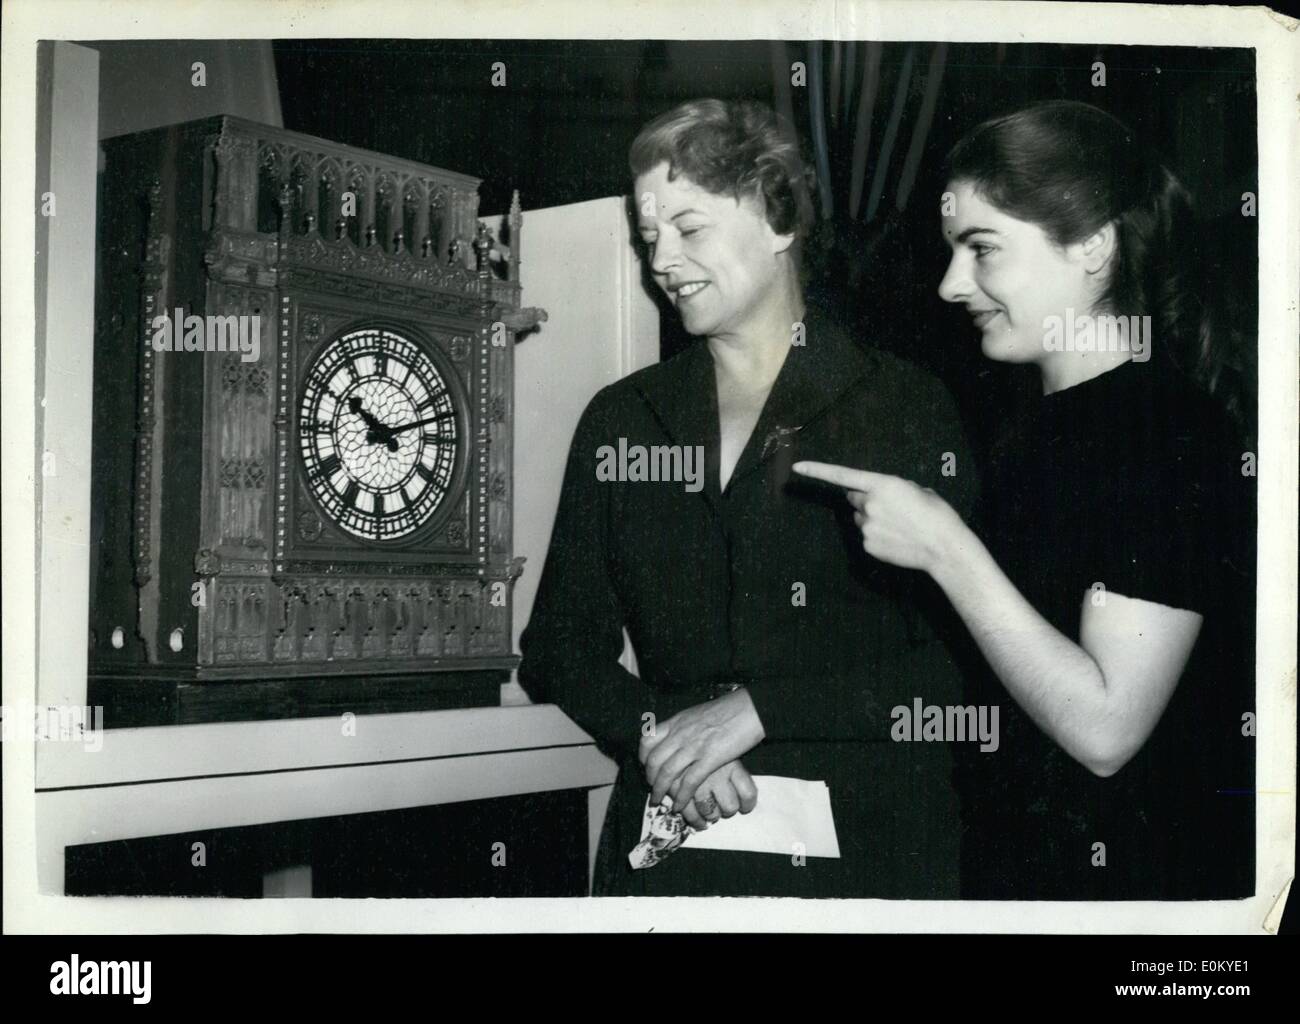 Sep. 09, 1952 - New clock for T.V. to replace the ''Goodnight Smile'' a fave for a face.: Two things are to disappear from Television the announcer's ''Goodnight Smile'' and the brass faced clock which gives viewers a final time check each night. A new clock has been designed by Mr. Robert Davis a London Sculptor. In future the sound-only news bulletin will be followed by the announcer saying goodnight. This is estimated to serve keeping five view transmitters operating another 15 minutes each night. Photo shows Joan Gilbert the T.V Stock Photo